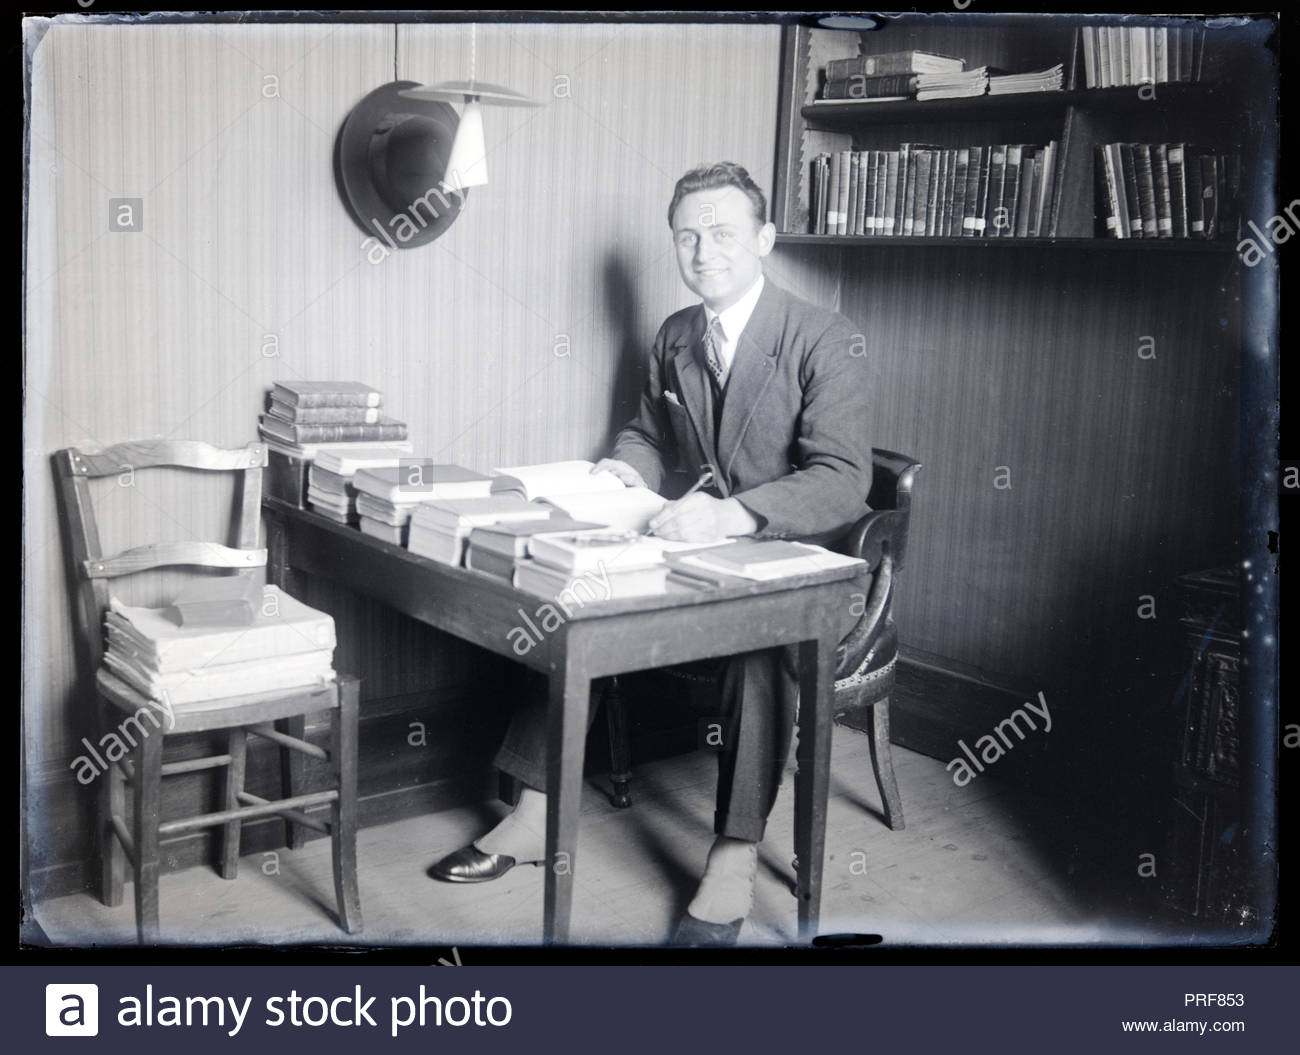 Writer Or Librarian With Books Sitting On A Table France Circa